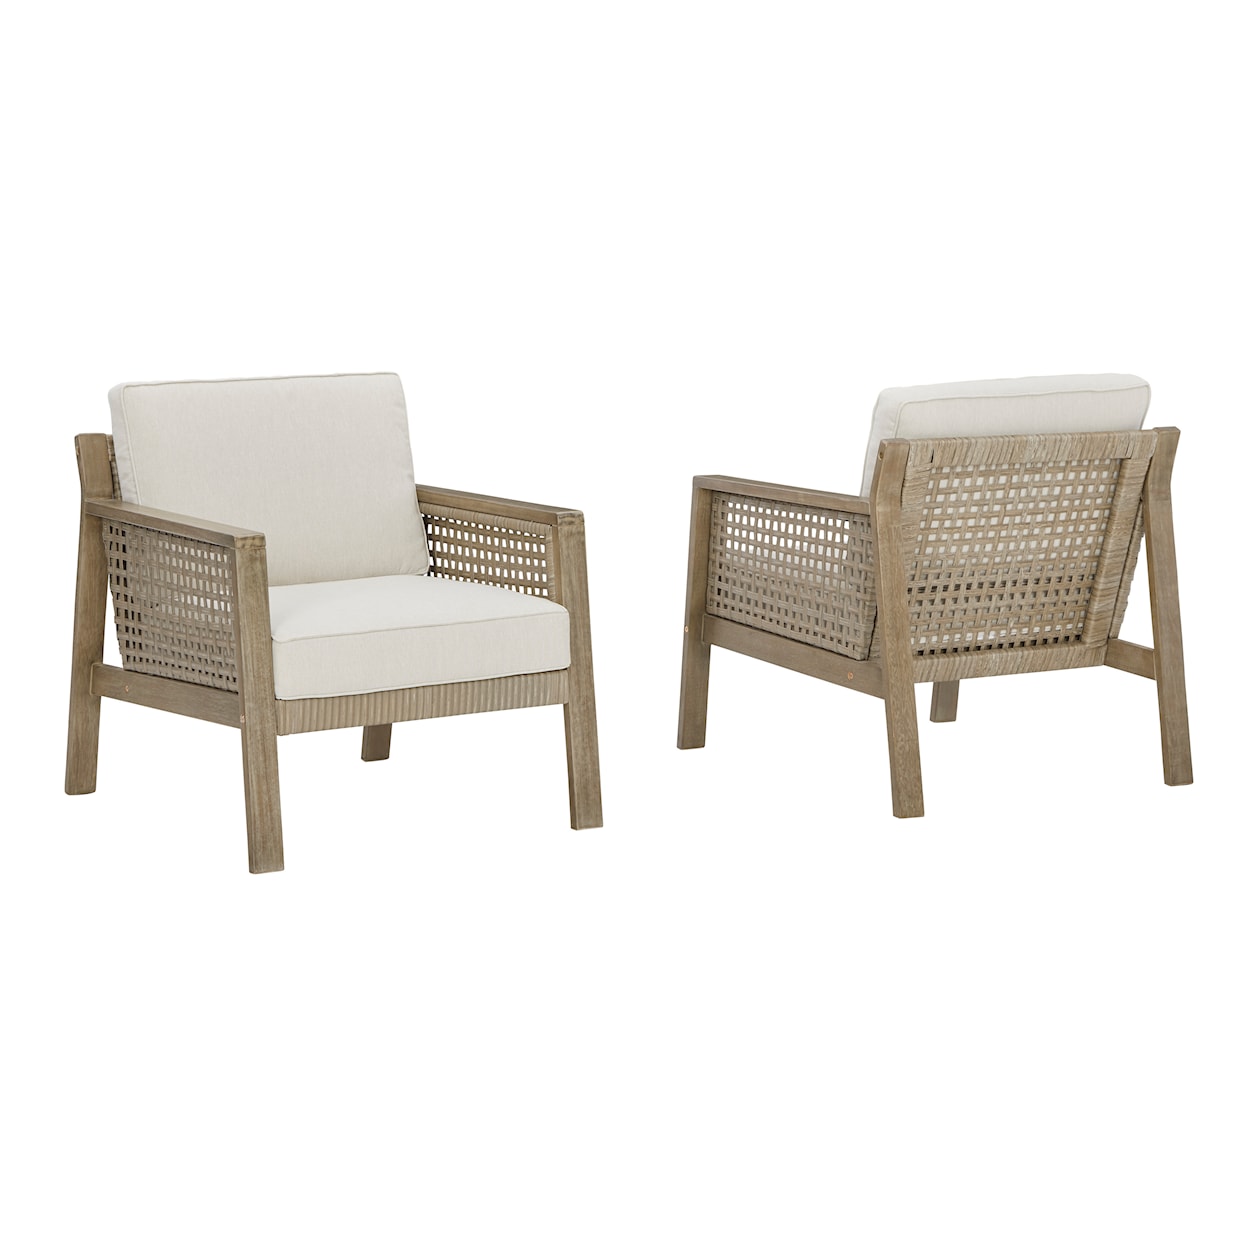 Signature Design by Ashley Barn Cove Lounge Chair with Cushion (Set of 2)